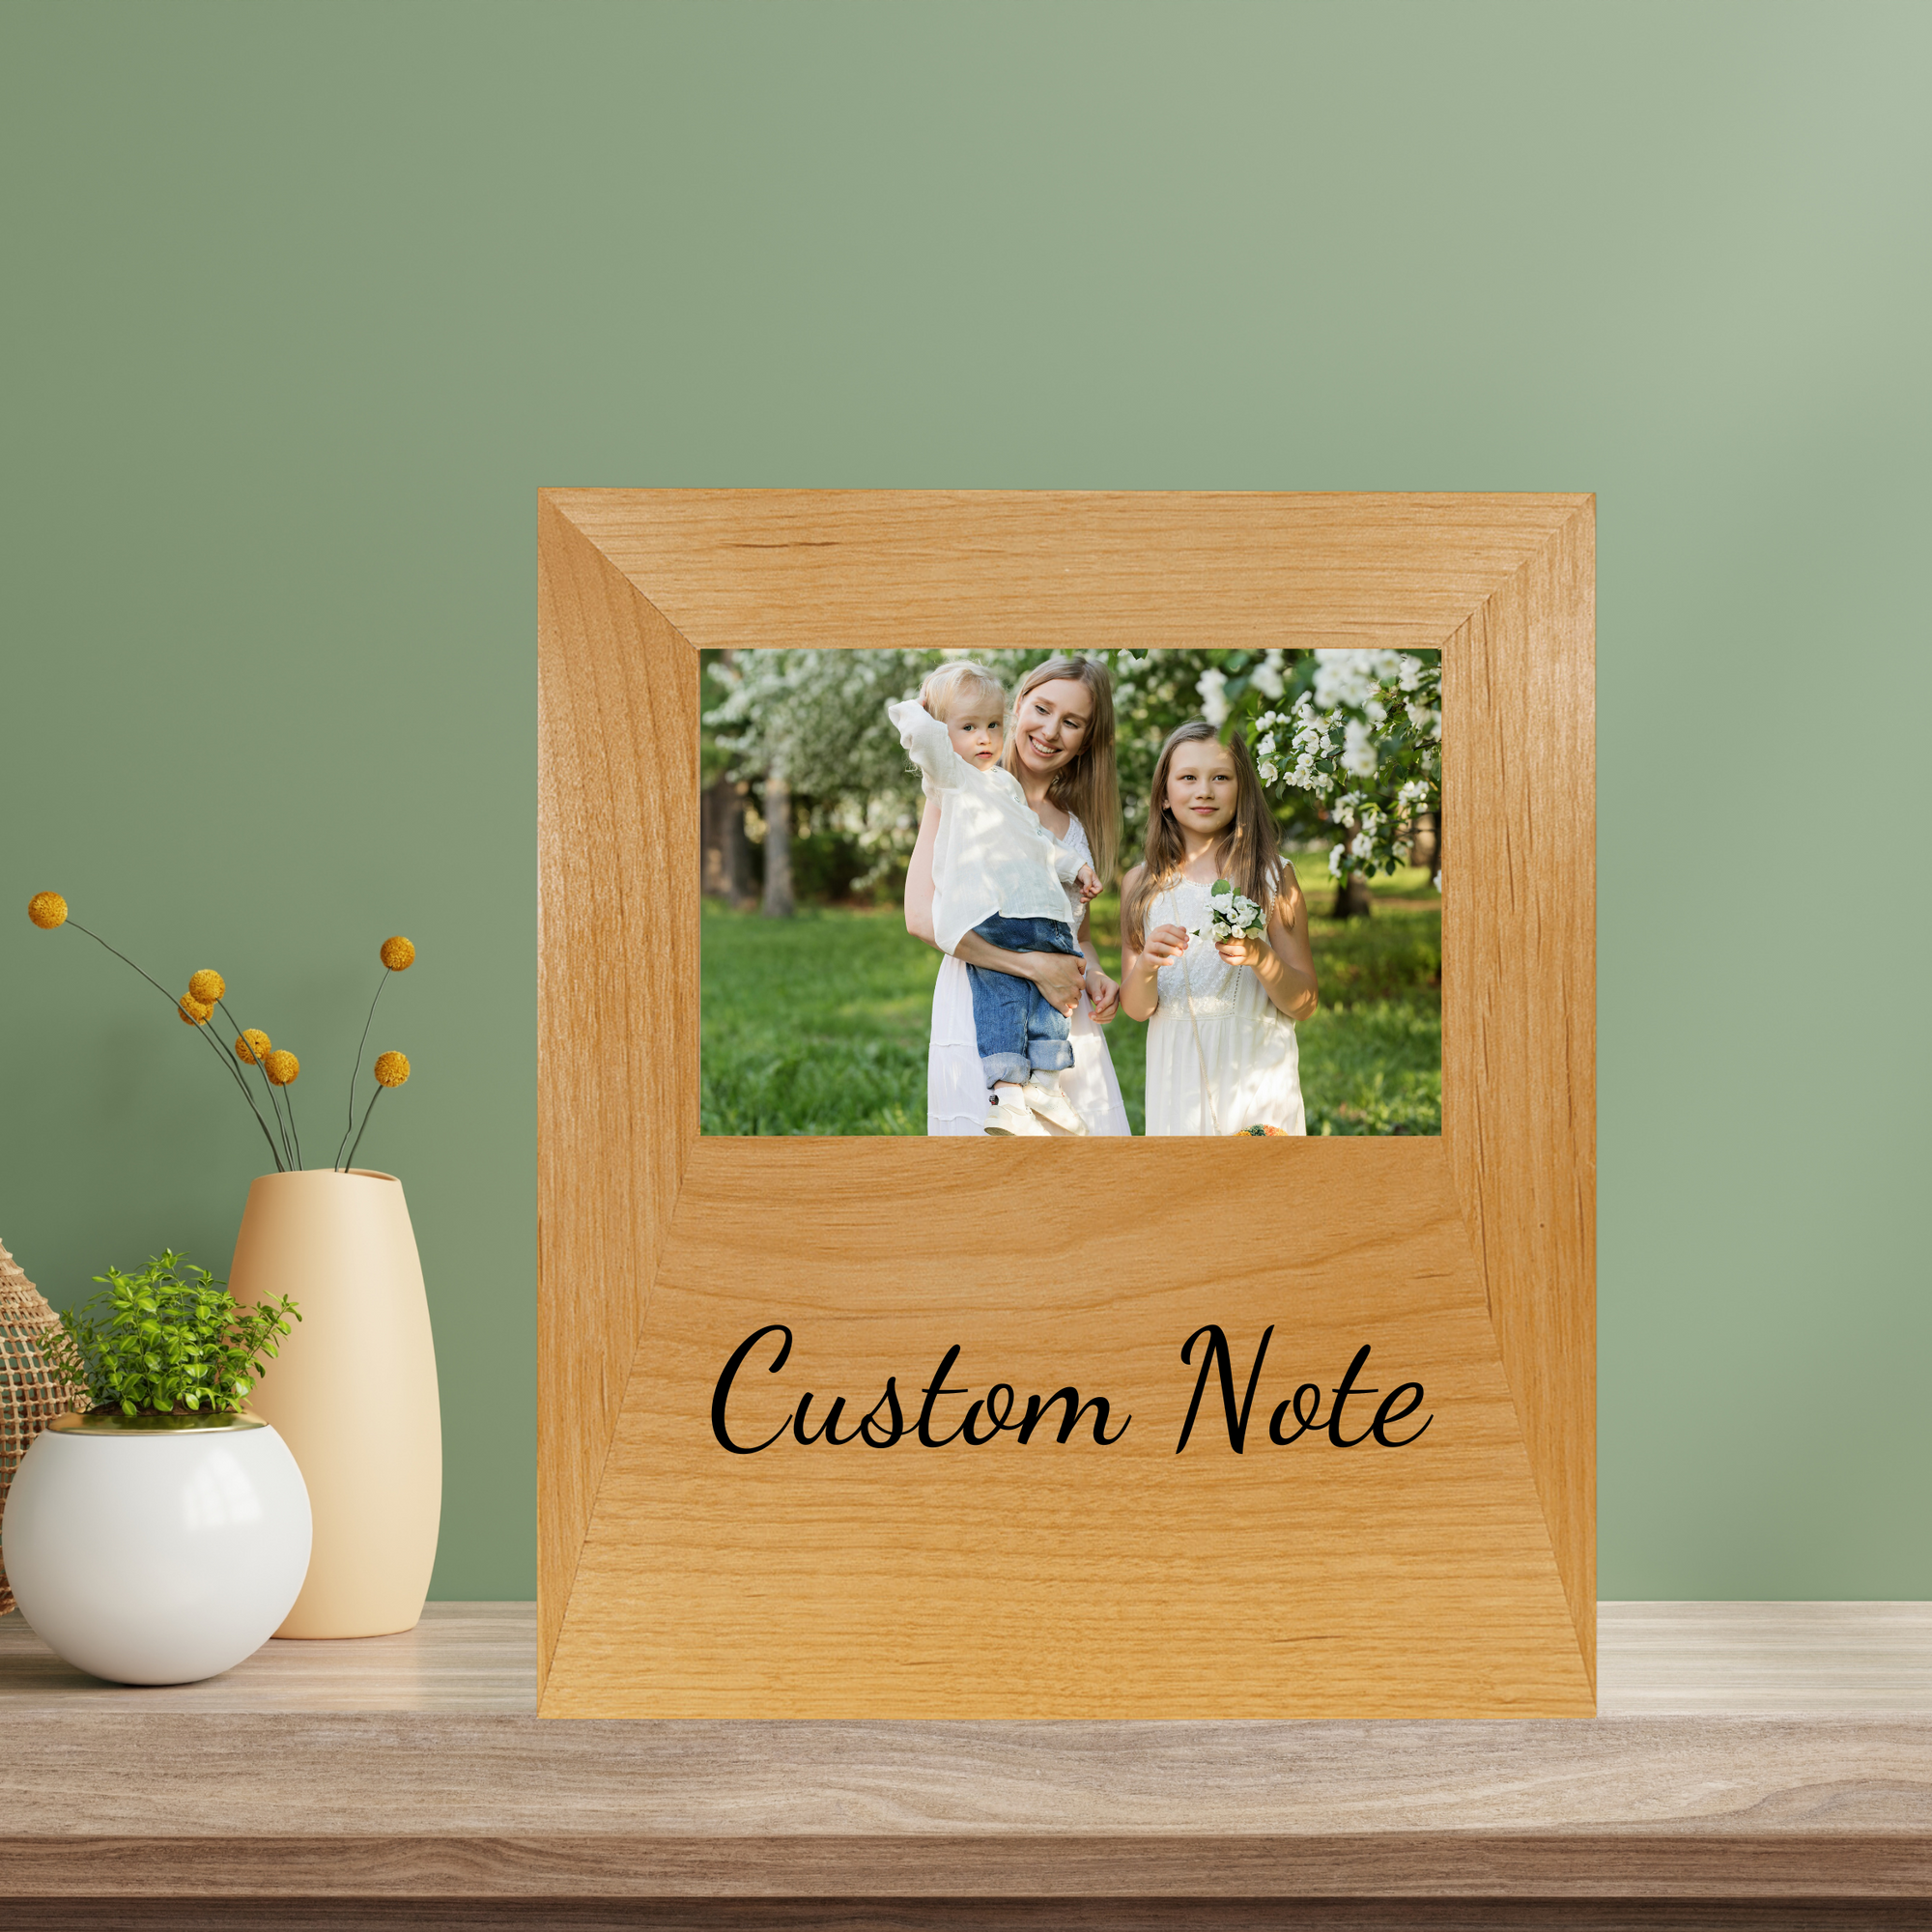 Memories Etched in Wood Frame